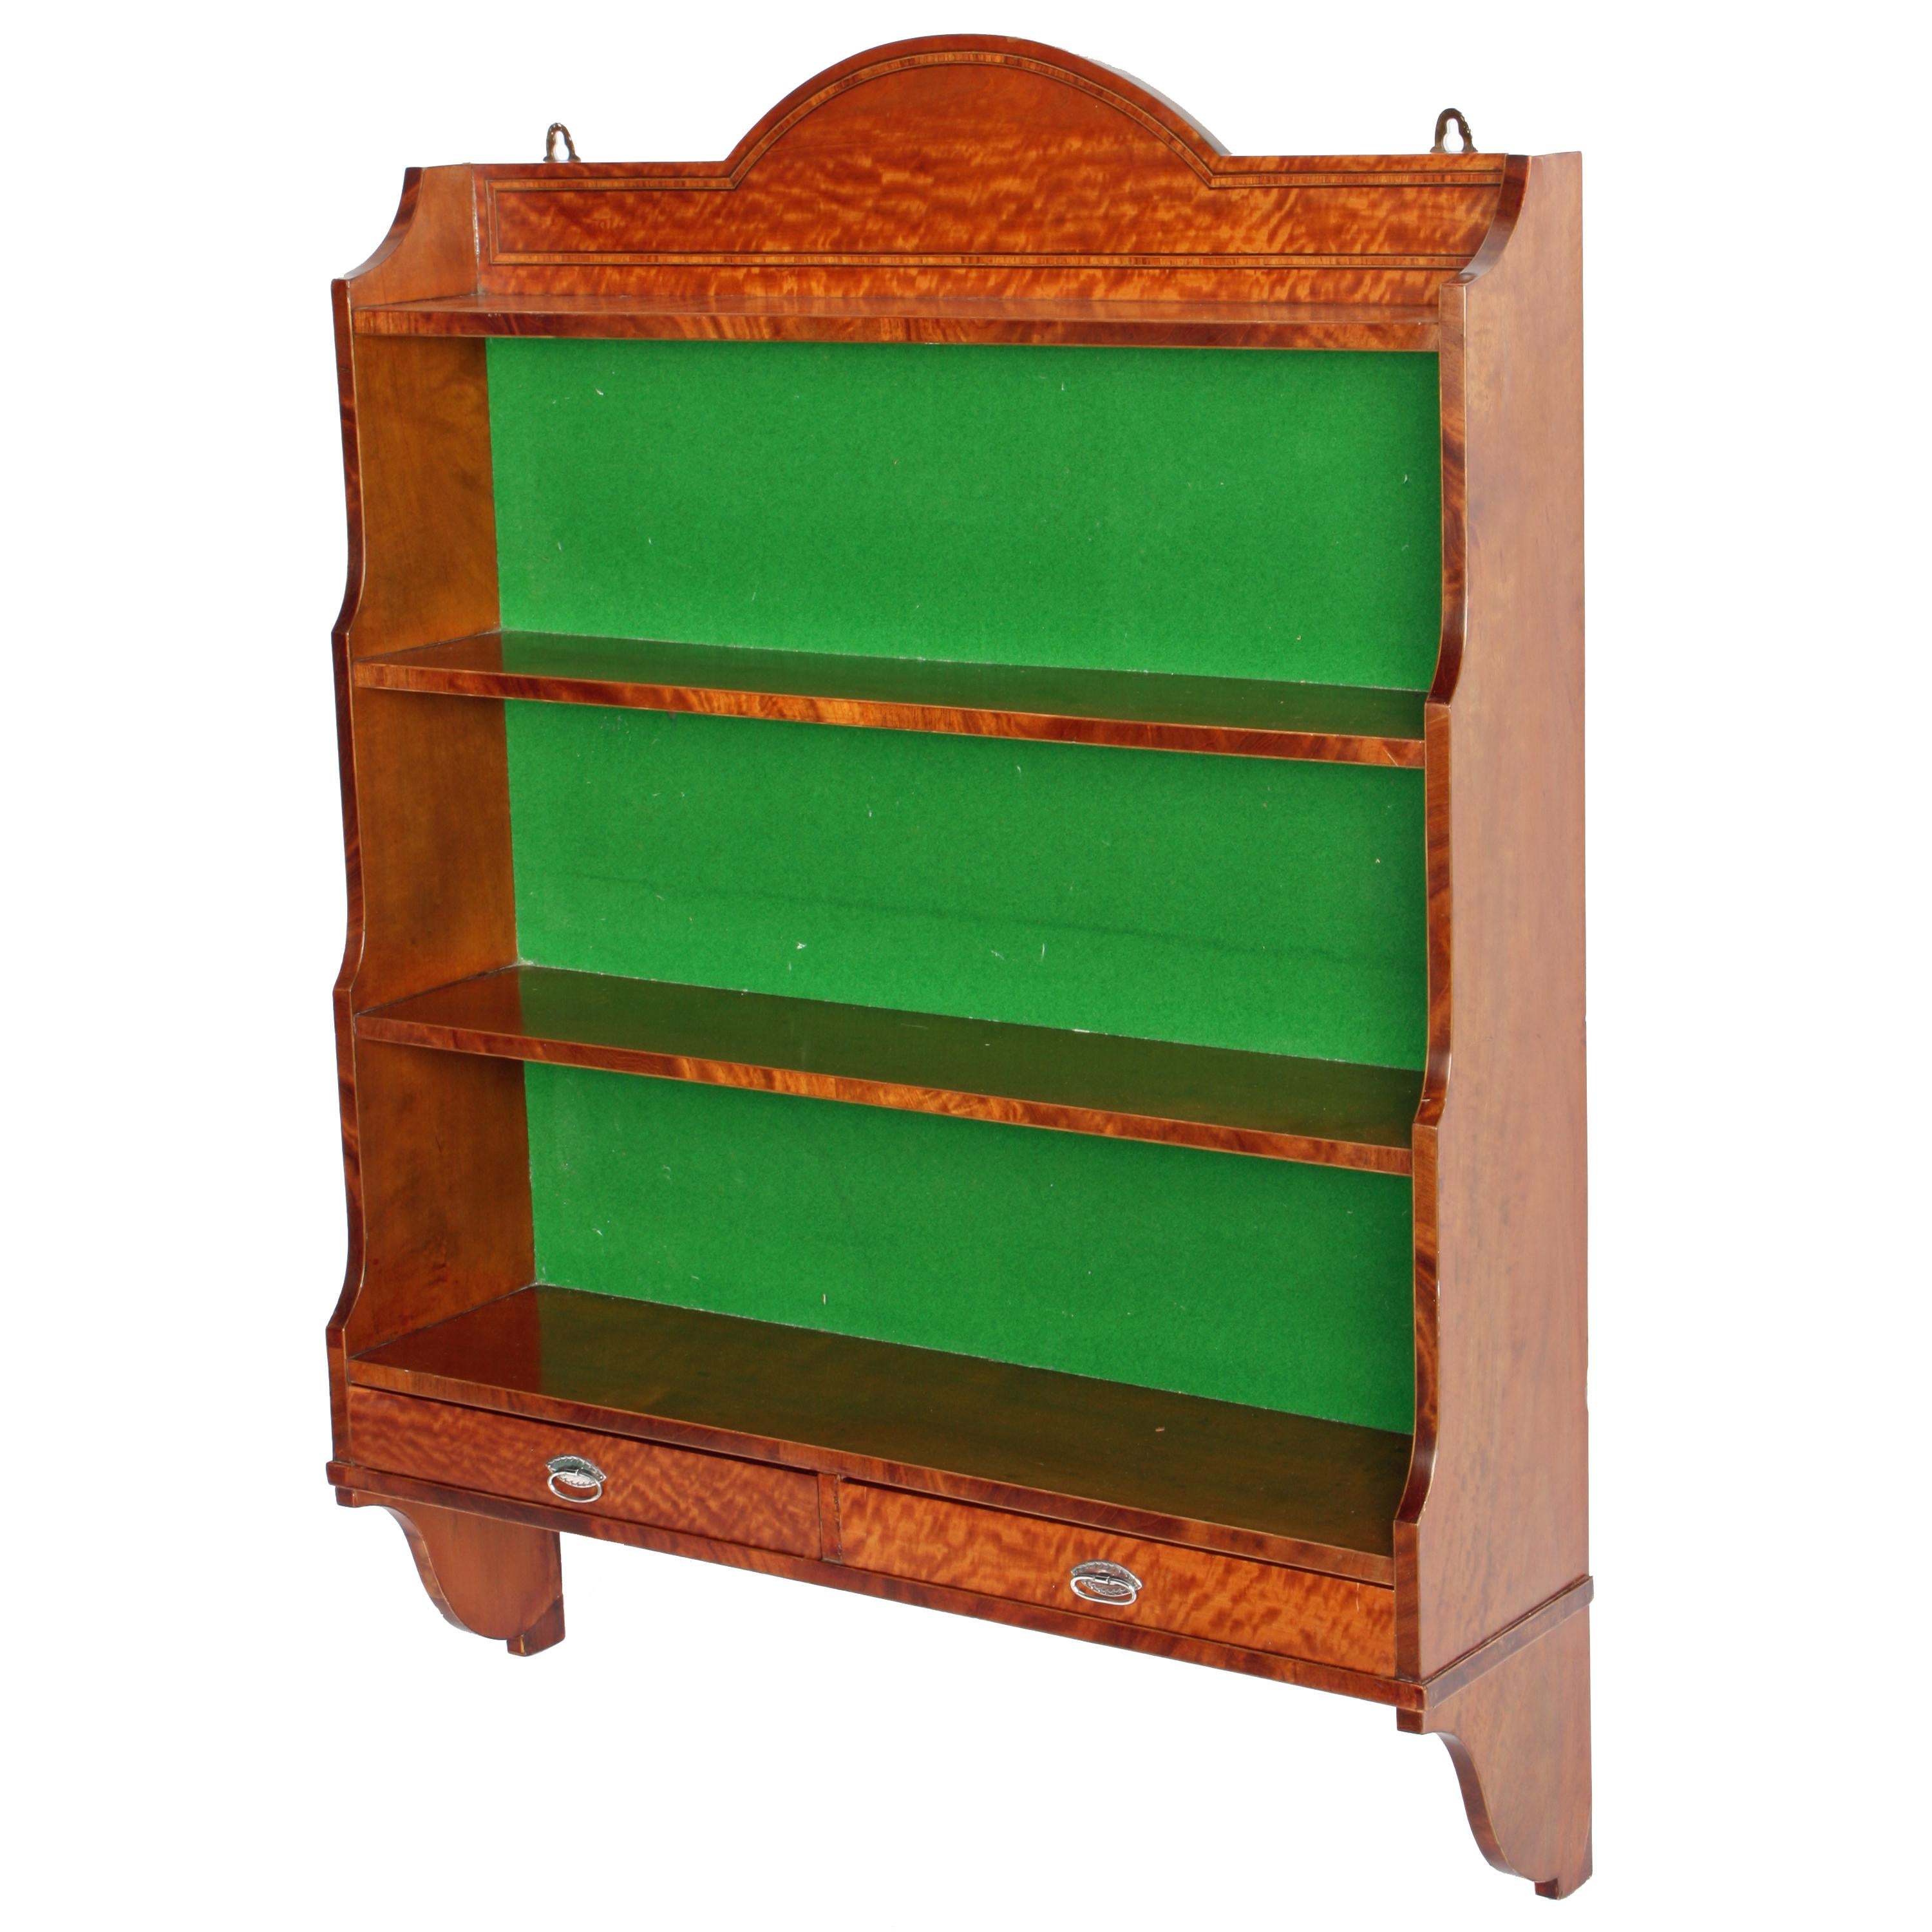 A set of late 19th-early 20th century Georgian style stepped wall shelves.

The shelves have satinwood veneered outer and inner side panels and the front facing edges are flame mahogany veneered with box wood edging.

The four shelves are